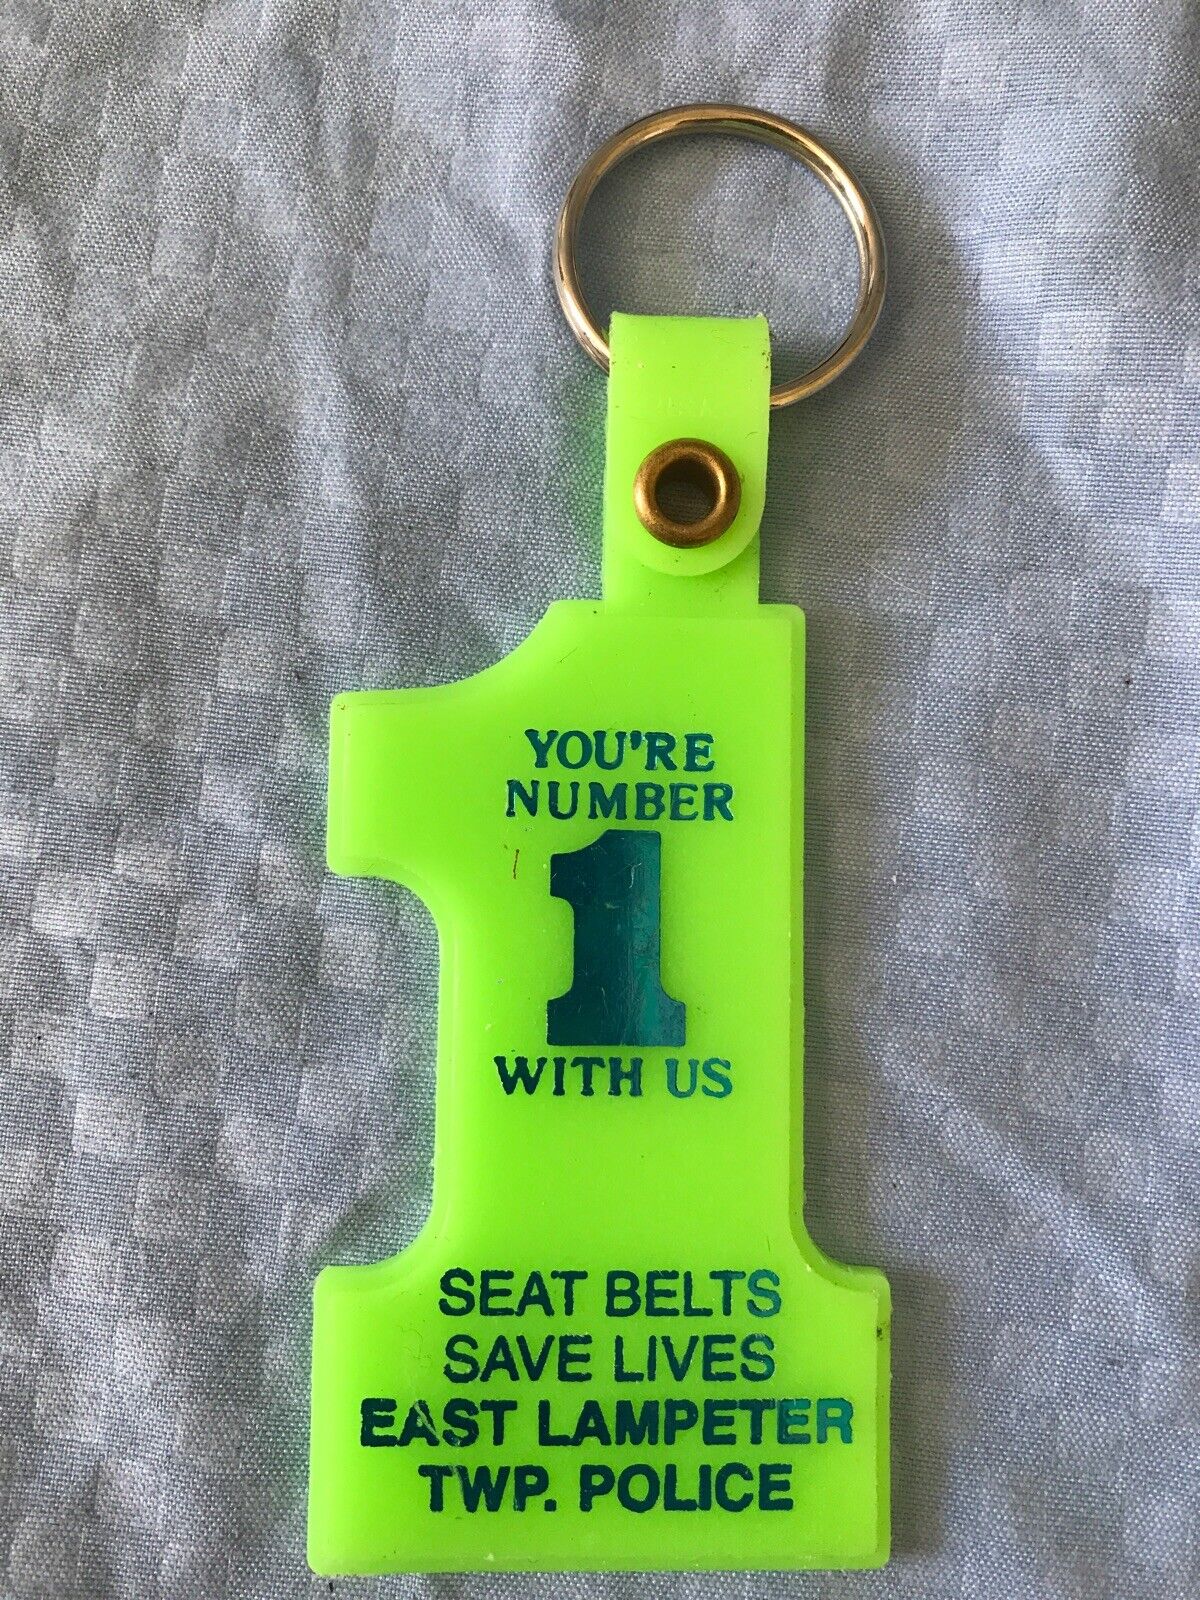 VINTAGE YOU’RE NUMBER 1 W/ US KEYCHAIN SEAT BELTS SAVE LIVES EAST LAMPETER TWP.